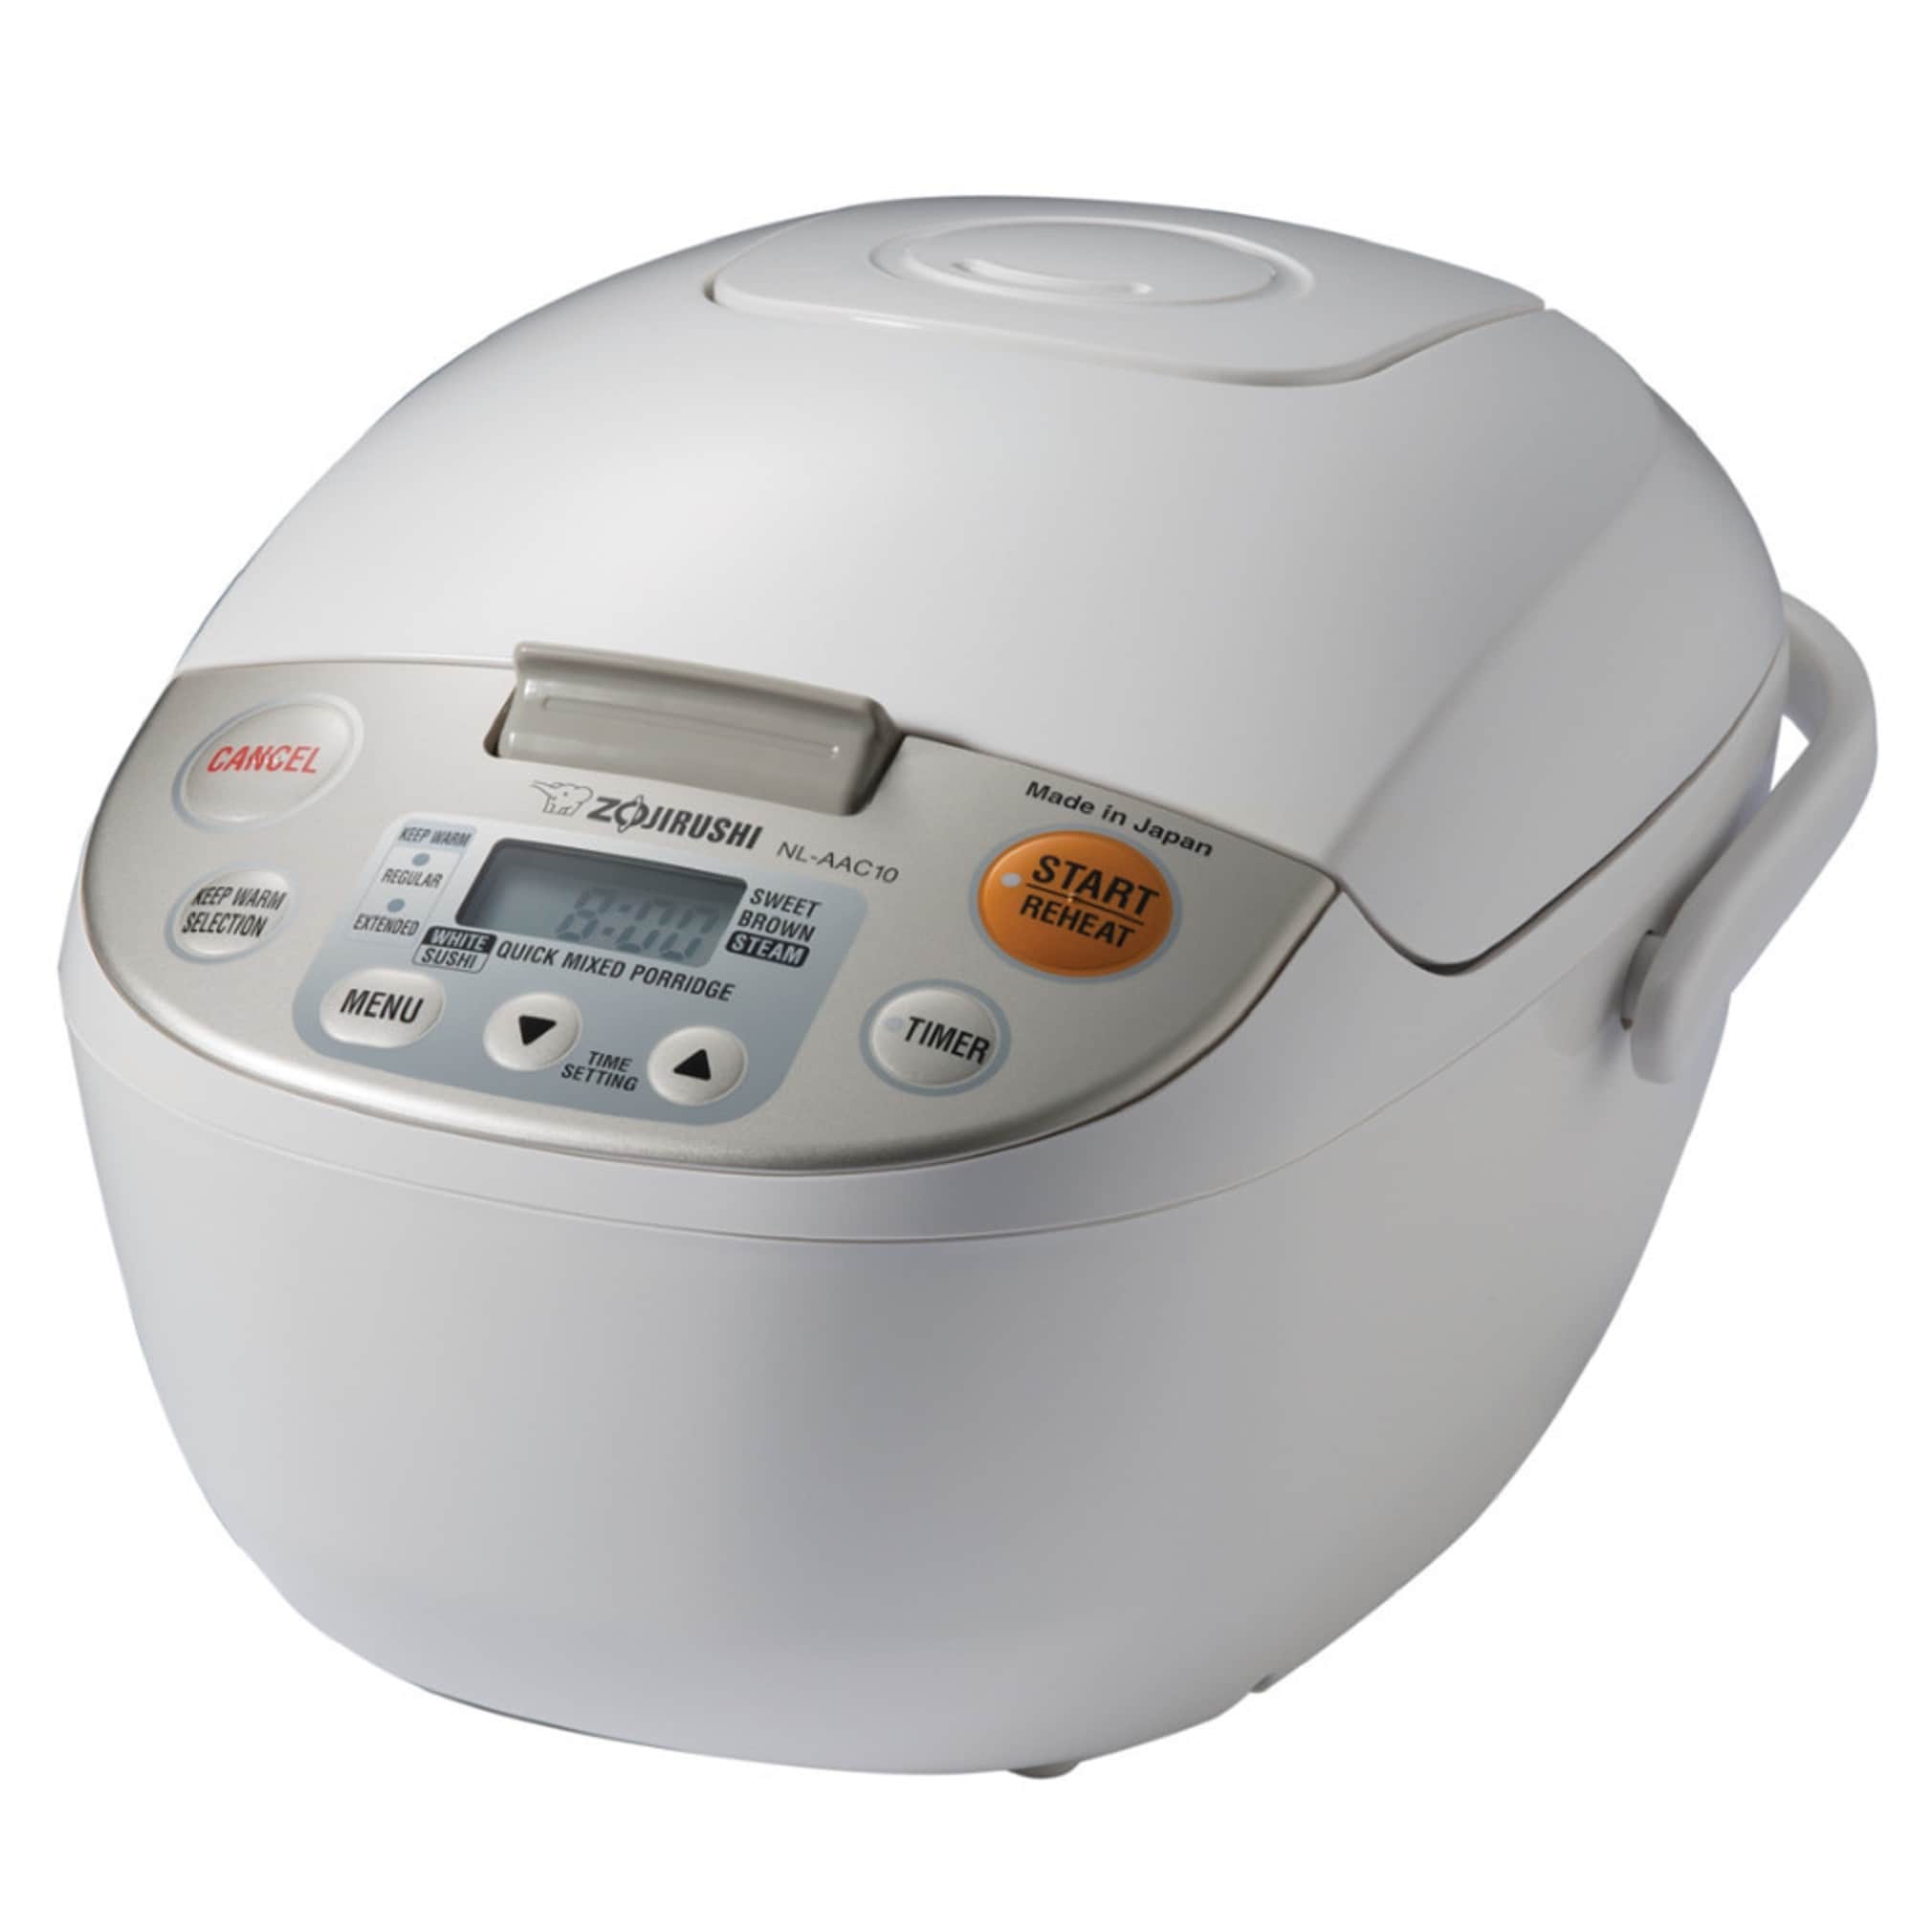 Zojirushi Hello Kitty 5.5 Cup Automatic Rice Cooker and Warmer